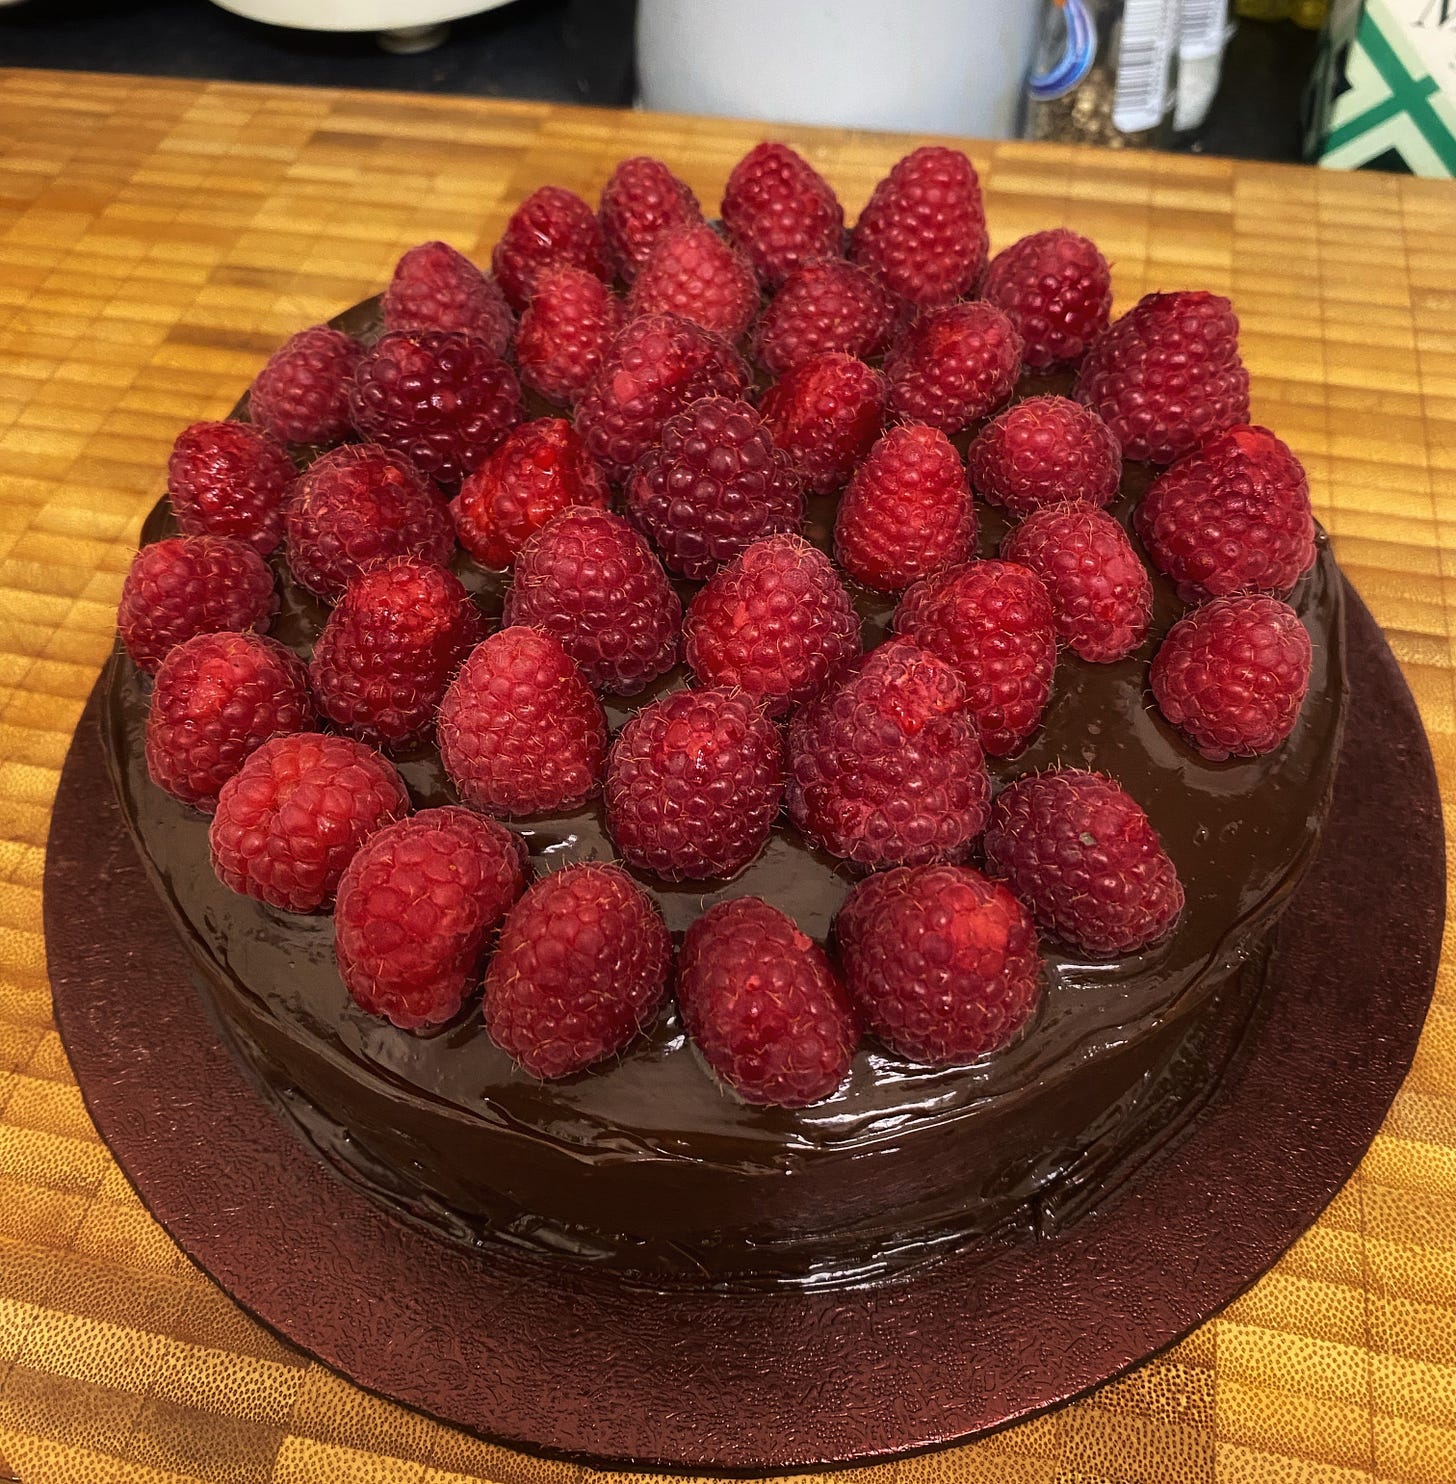 Another image of a ganache-covered chocolate cake, this time topped with fresh raspberries. One raspberry is missing.